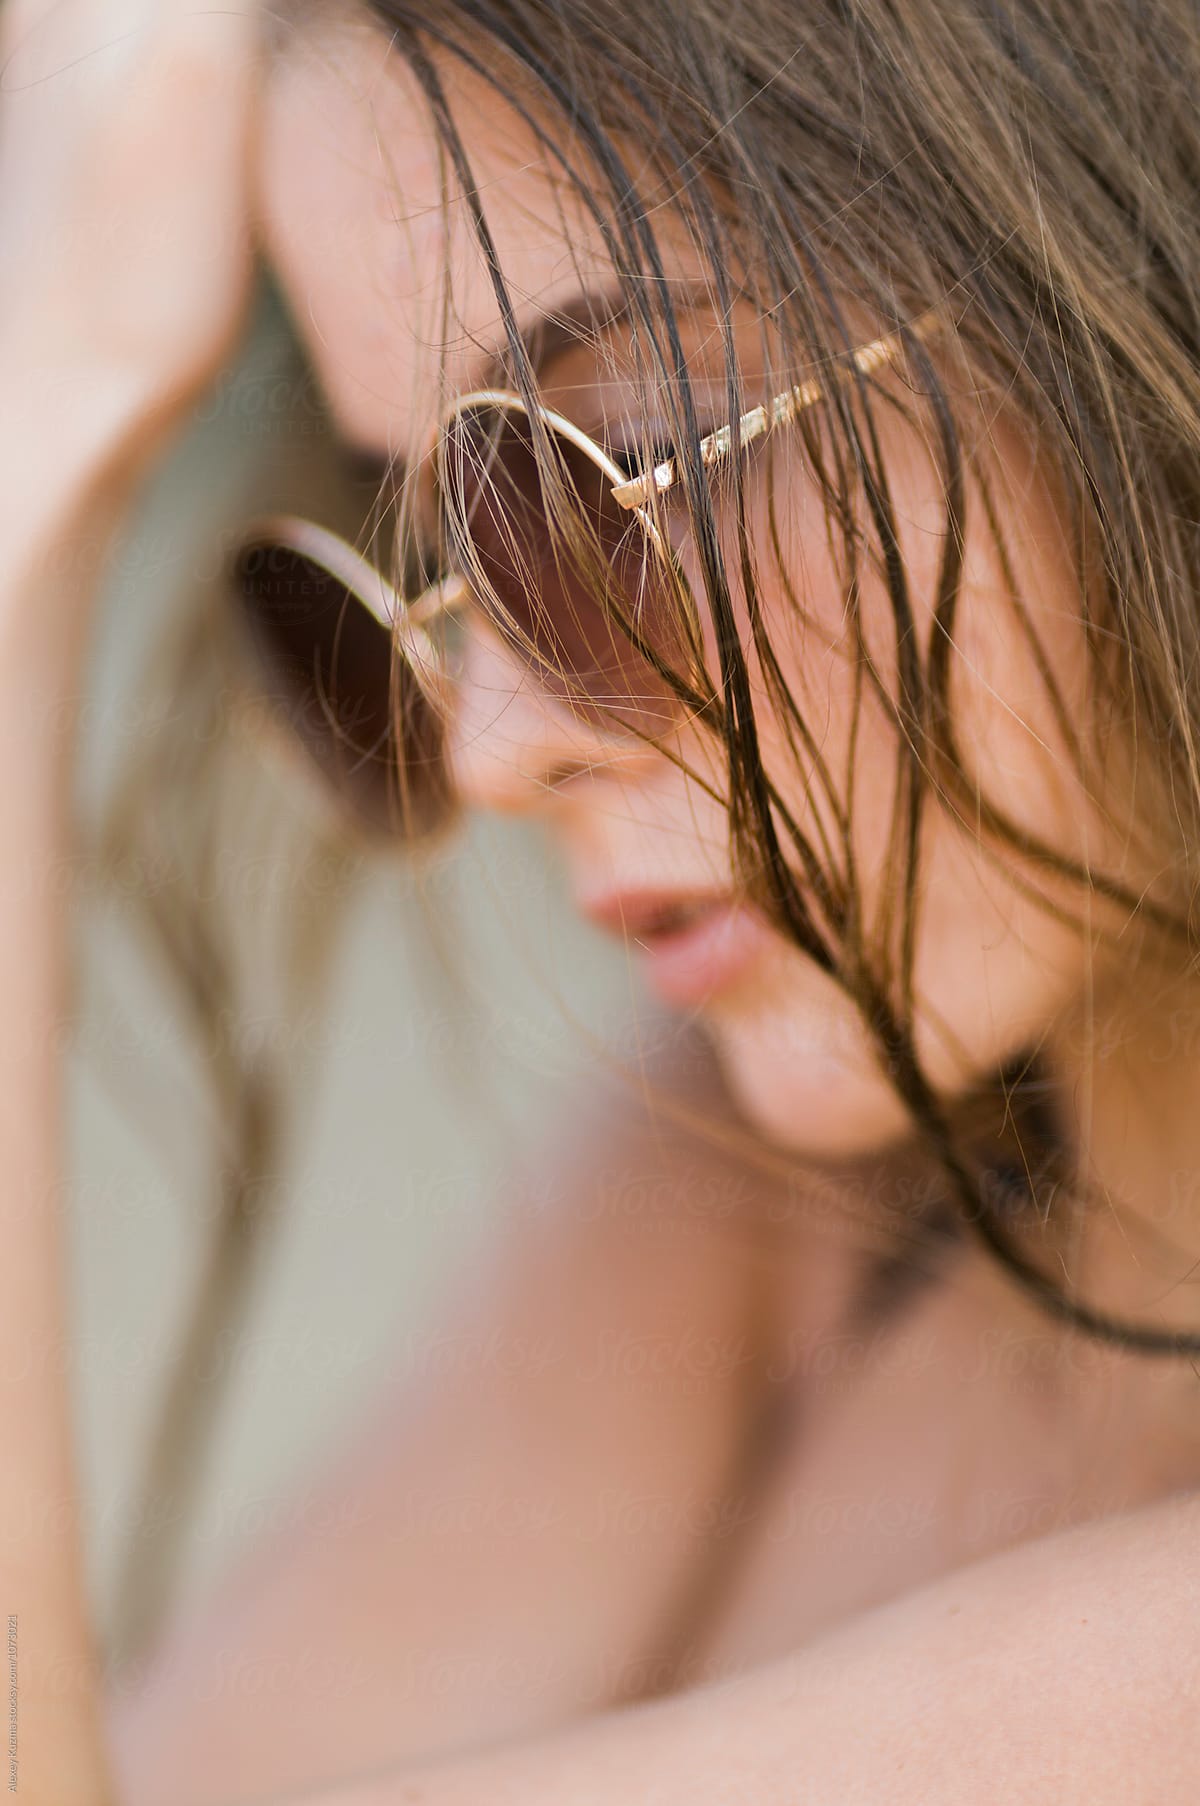 young woman with round sunglasses